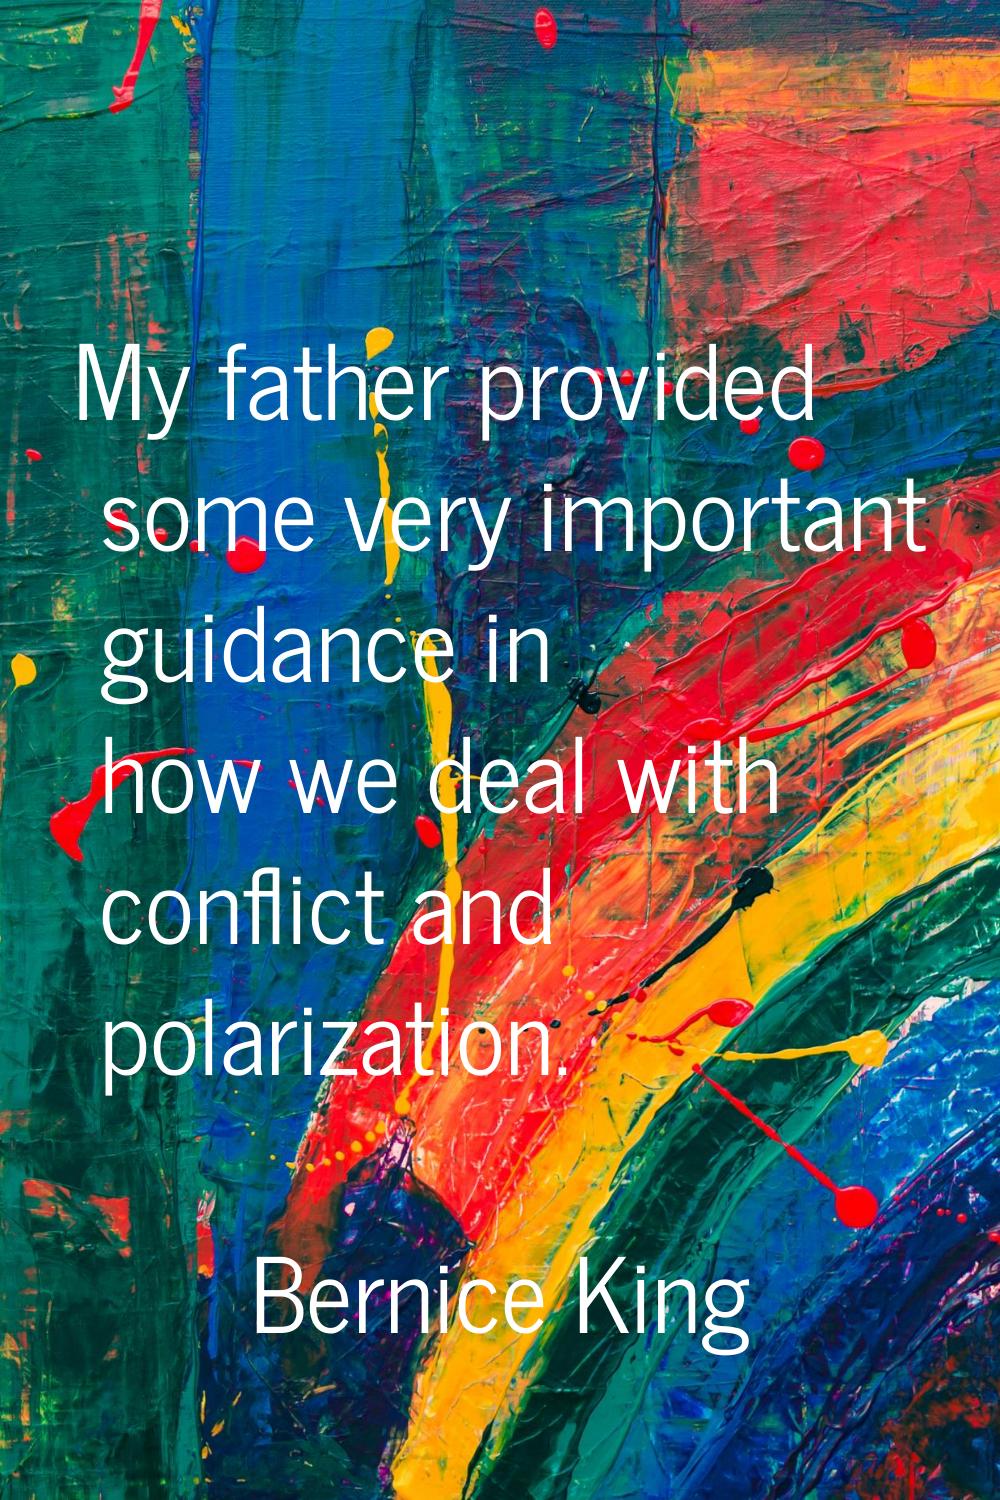 My father provided some very important guidance in how we deal with conflict and polarization.